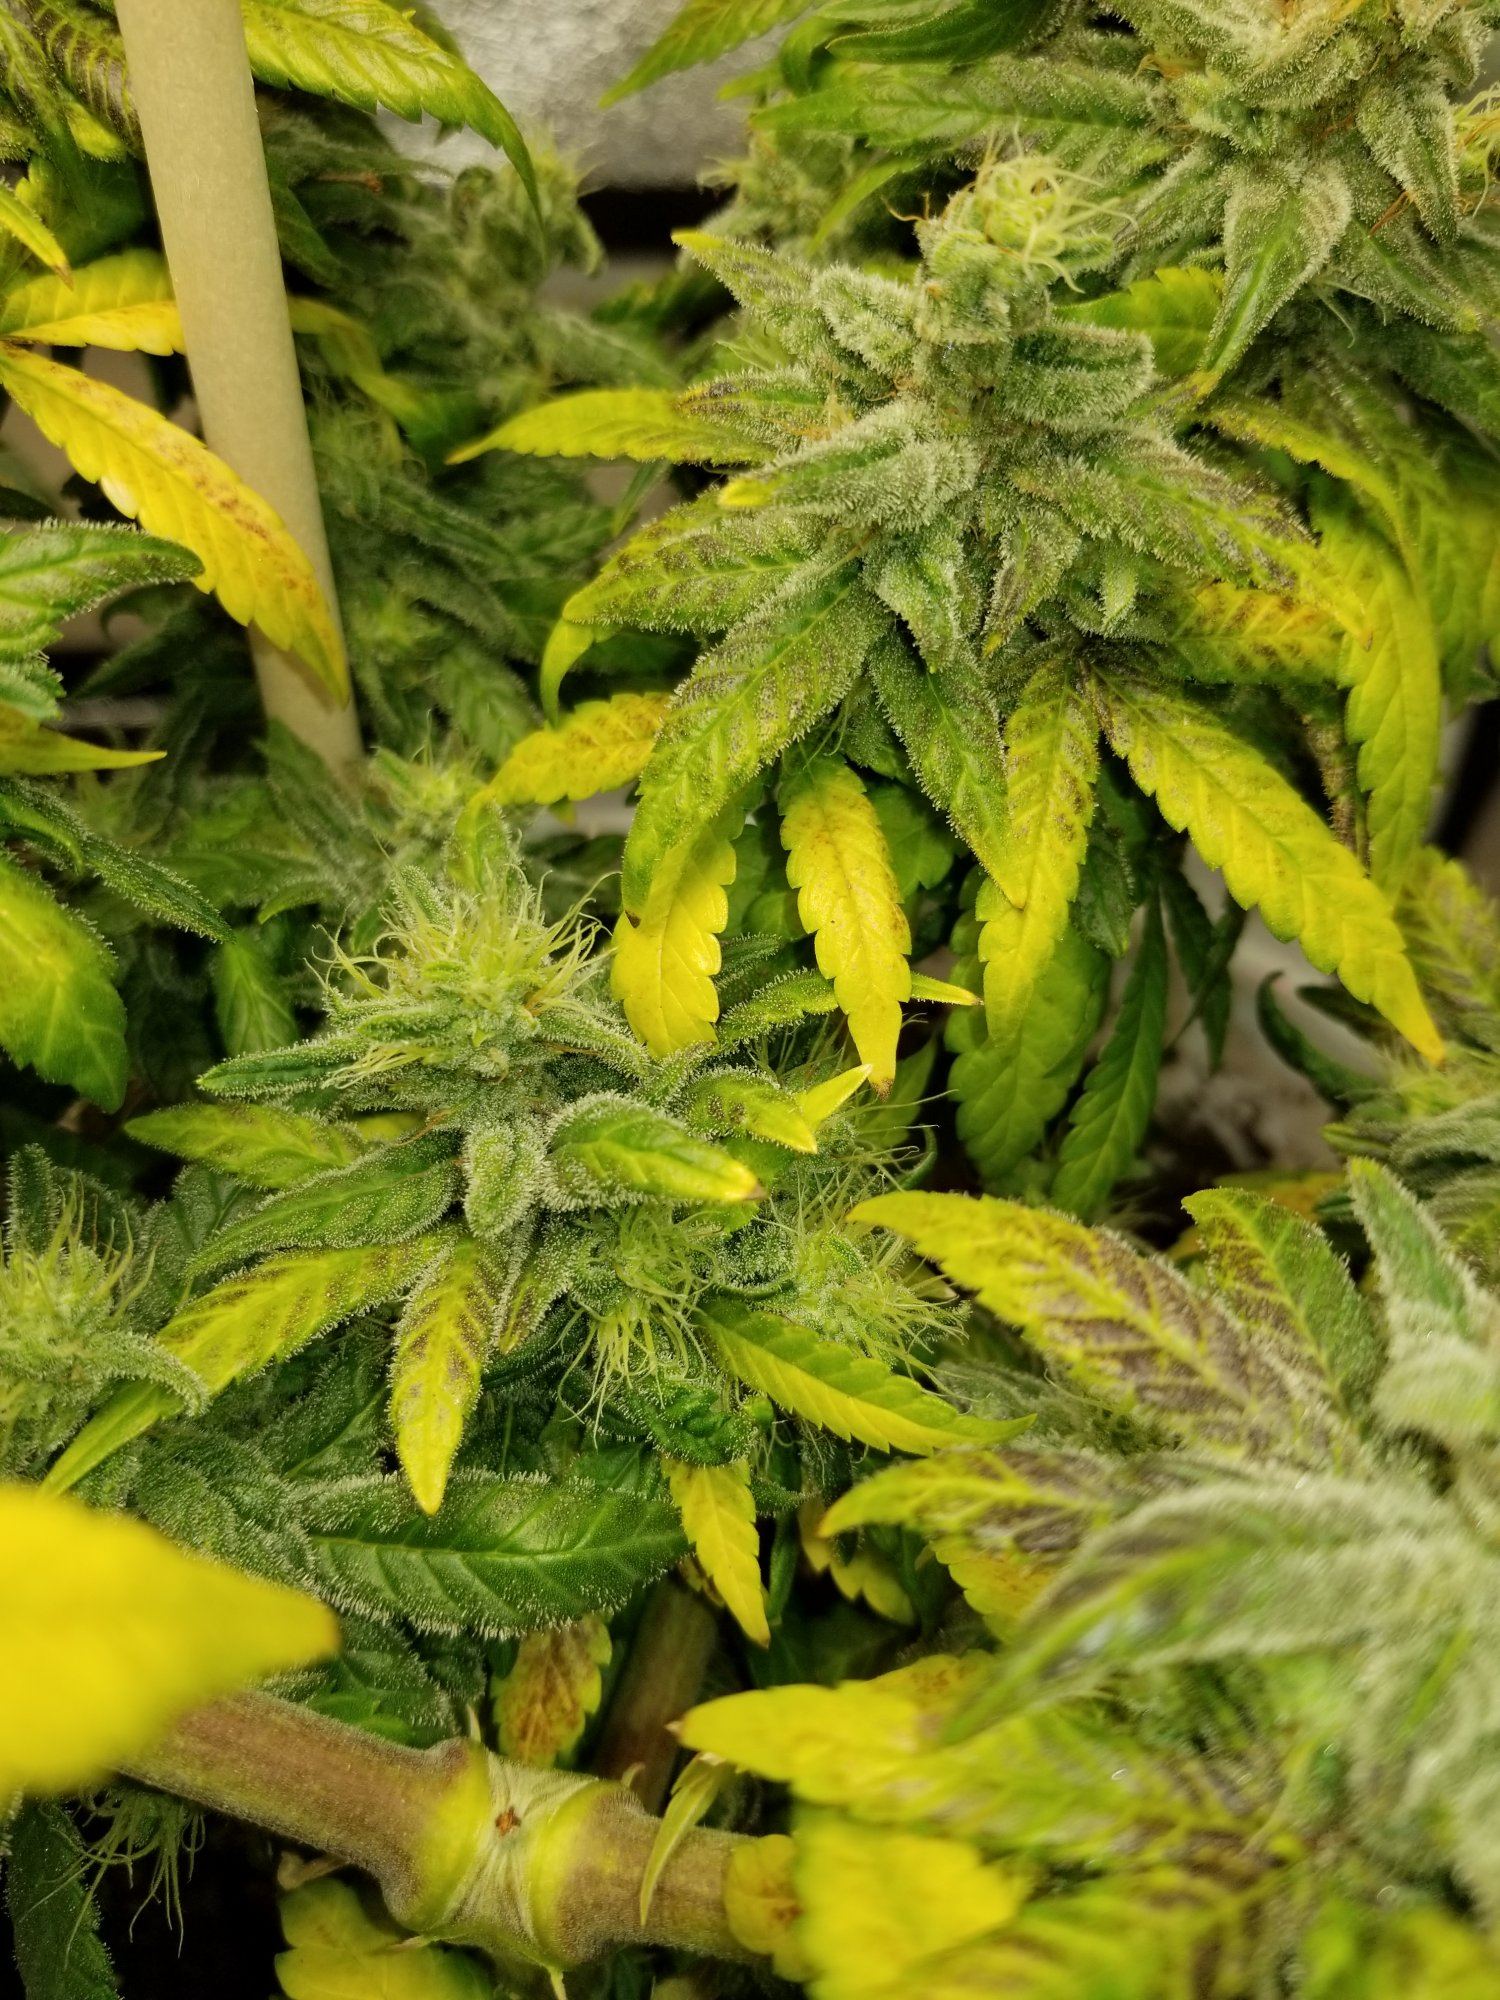 Unknown strain producing genetic foxtails 4